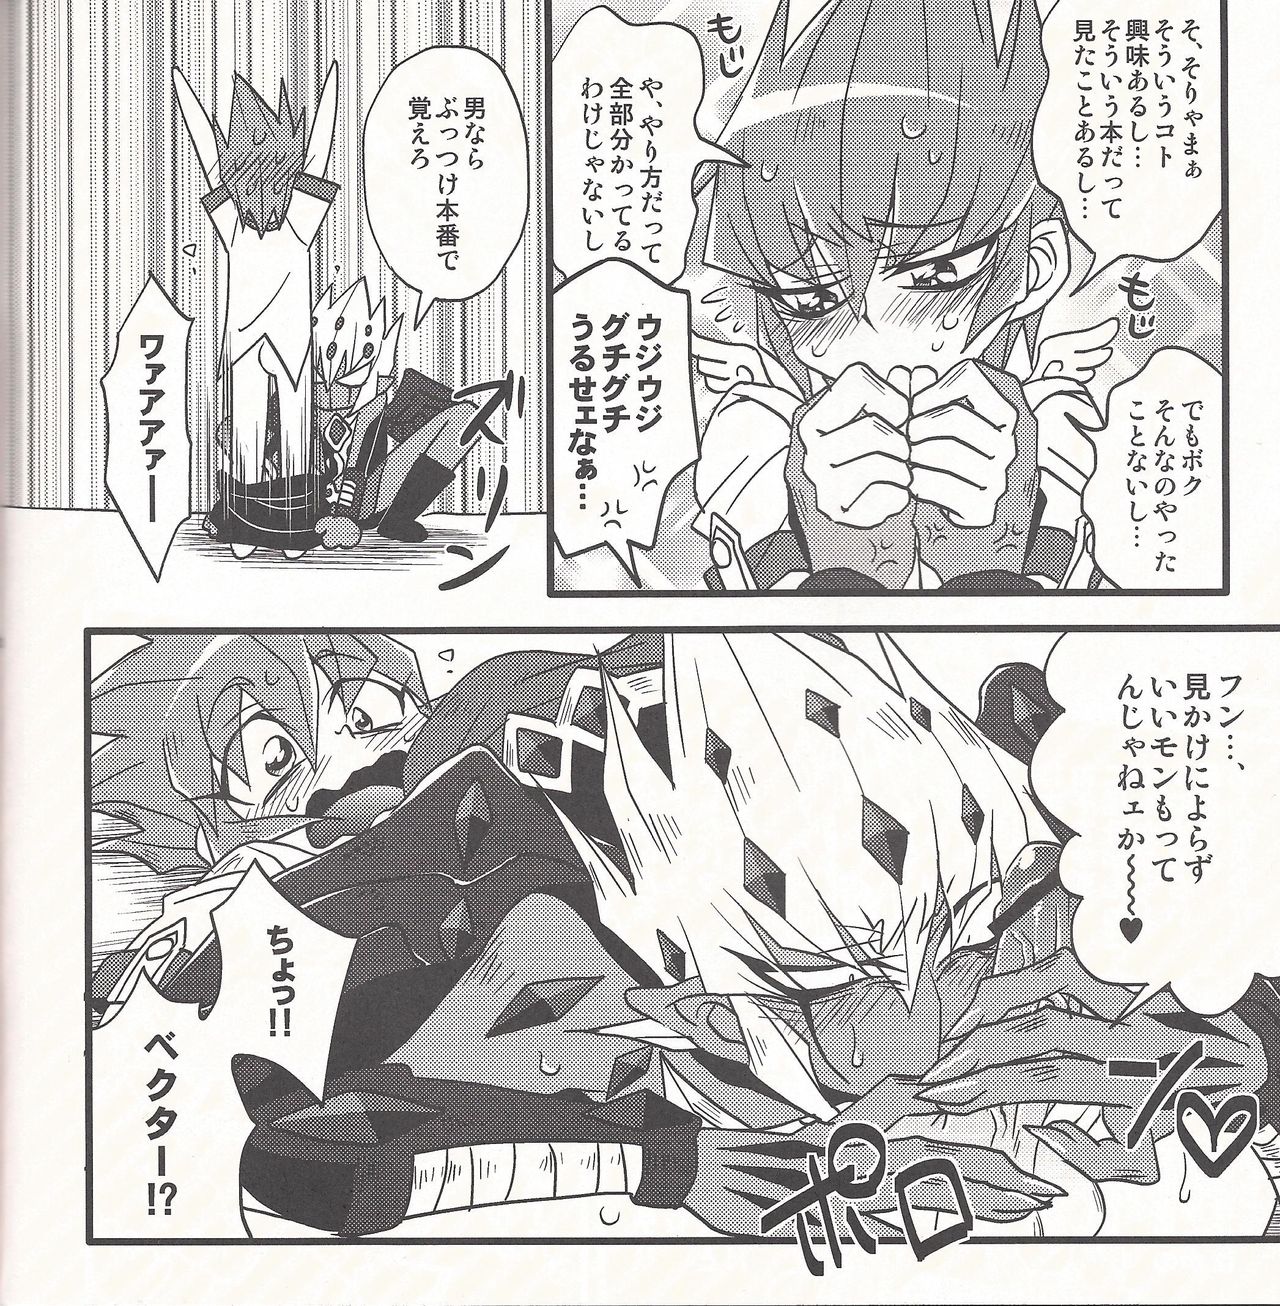 (DUEL PARTY2) [JINBOW (Chiyo, Hatch, Yosuke)] Pajama Party in the Starry Heaven (Yu-Gi-Oh! Zexal) page 13 full